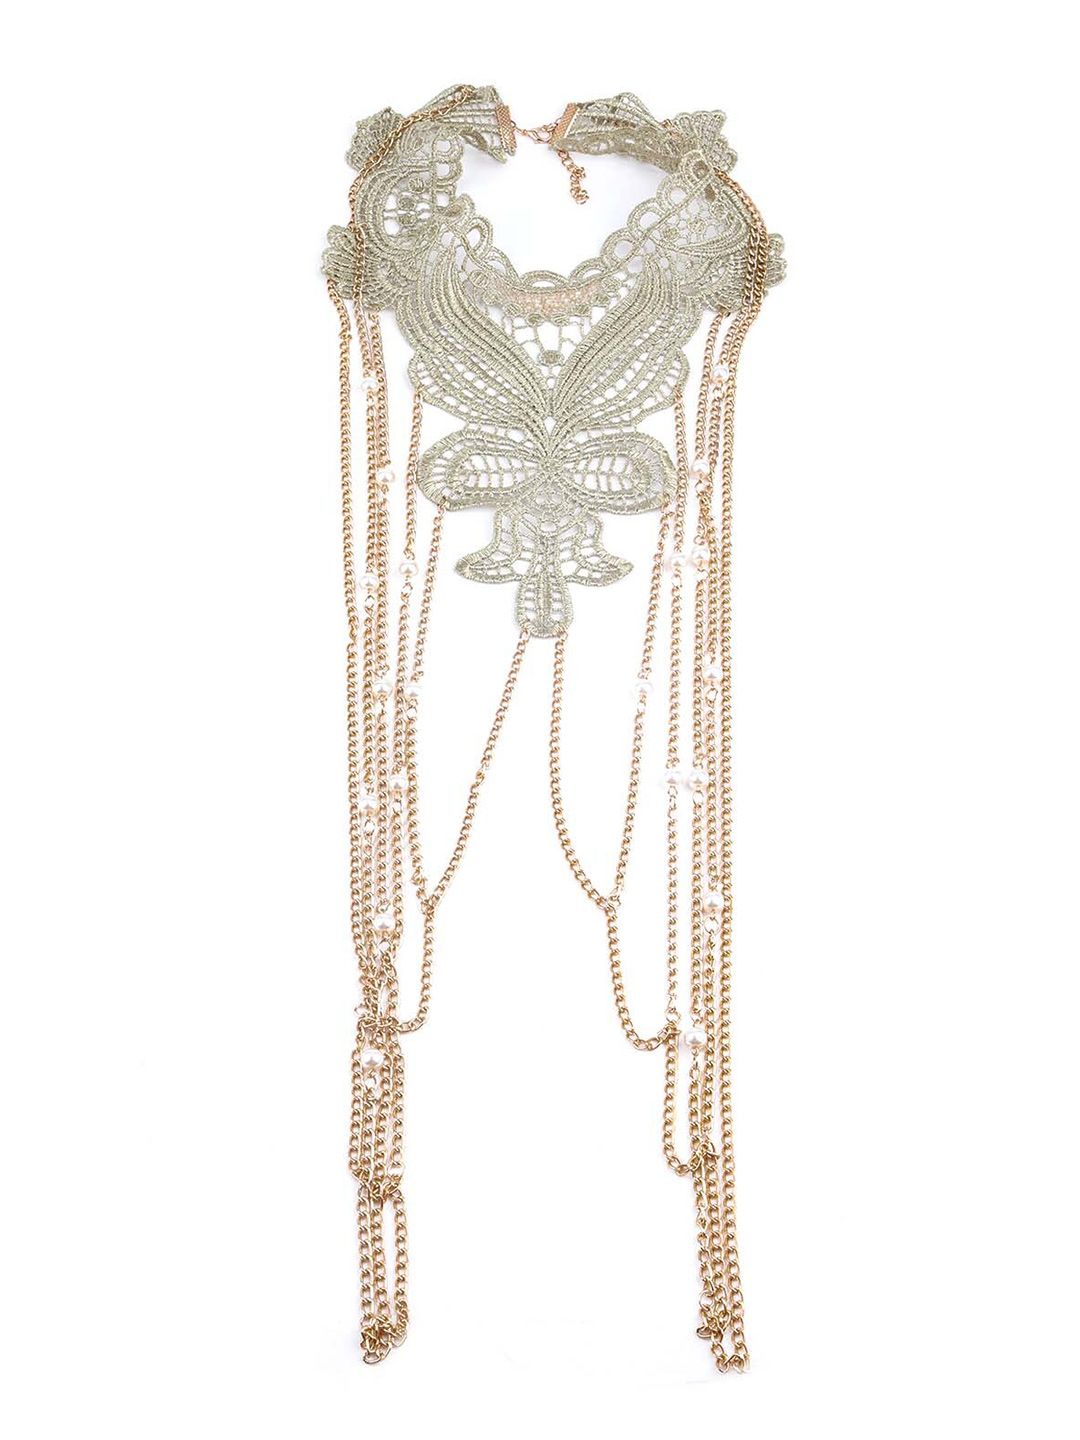 ODETTE Gold-Toned Lace Embellished Body Chain Price in India